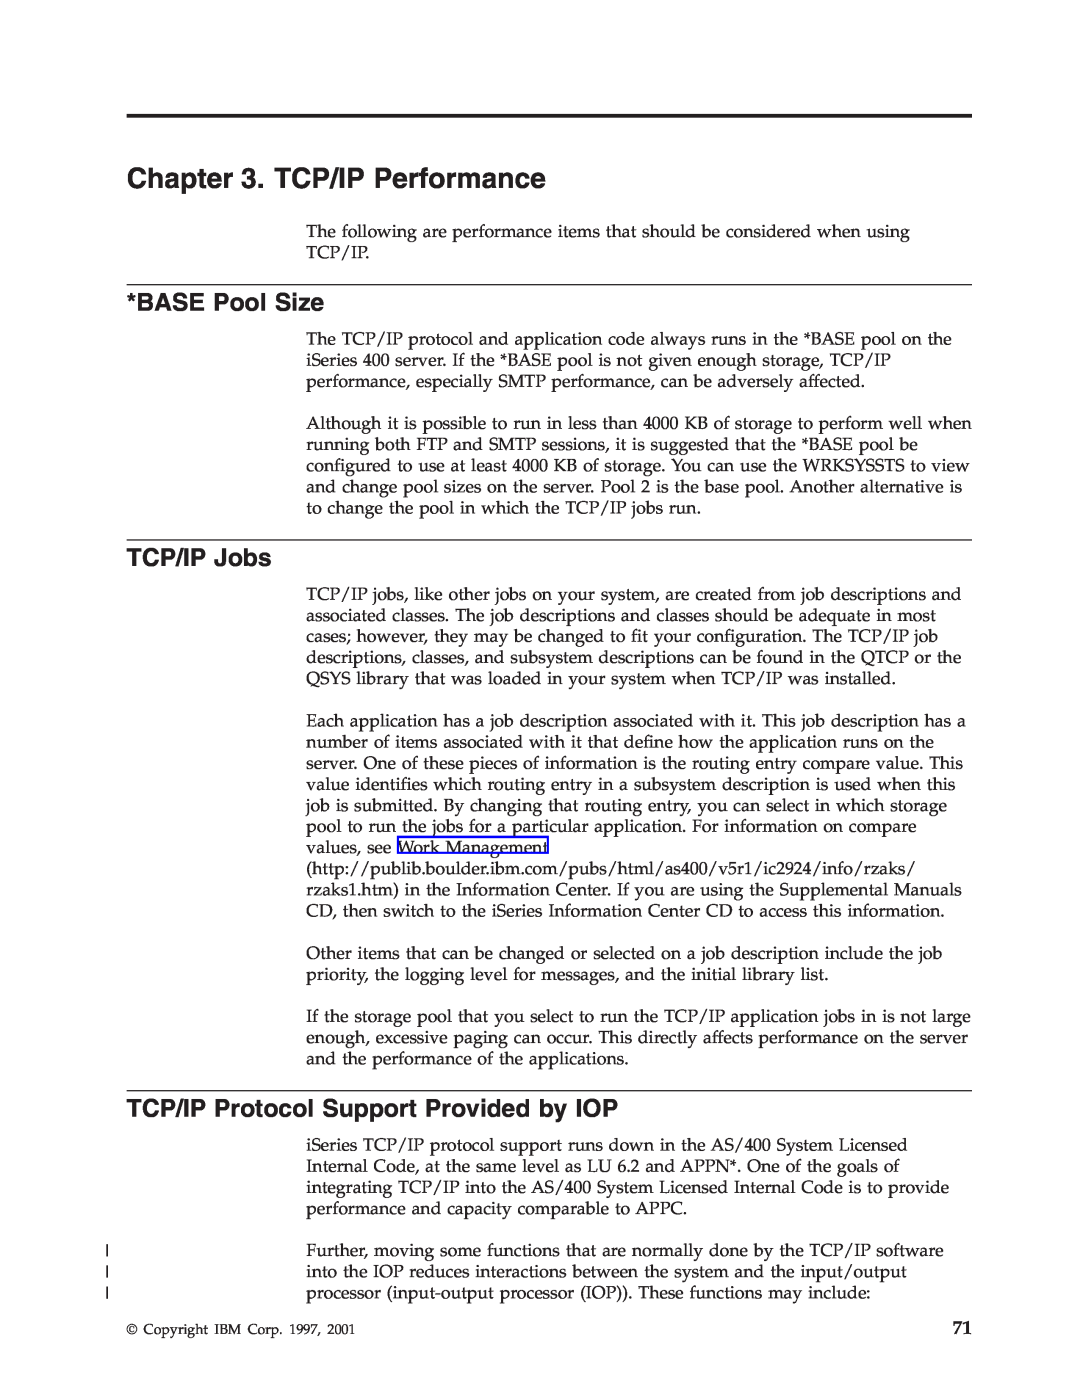 IBM SC41-5420-04 manual TCP/IP Performance, BASE Pool Size, TCP/IP Jobs, TCP/IP Protocol Support Provided by IOP 